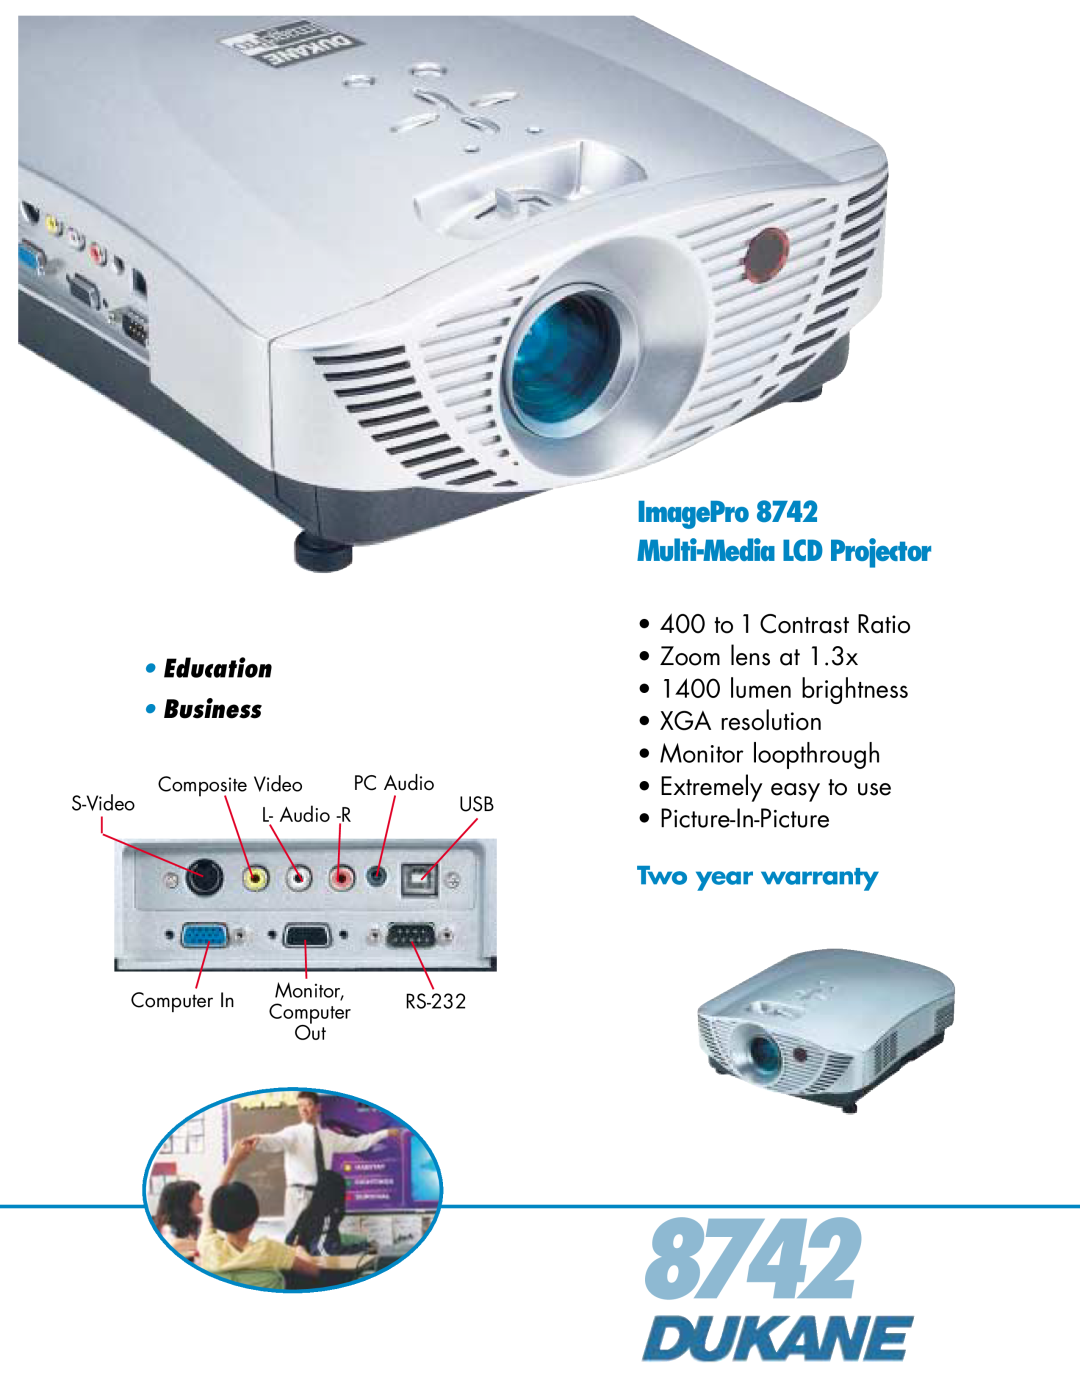 Dukane 8742 warranty Education Business, 400 to 1 Contrast Ratio Zoom lens at 1400 lumen brightness, Picture-In-Picture 